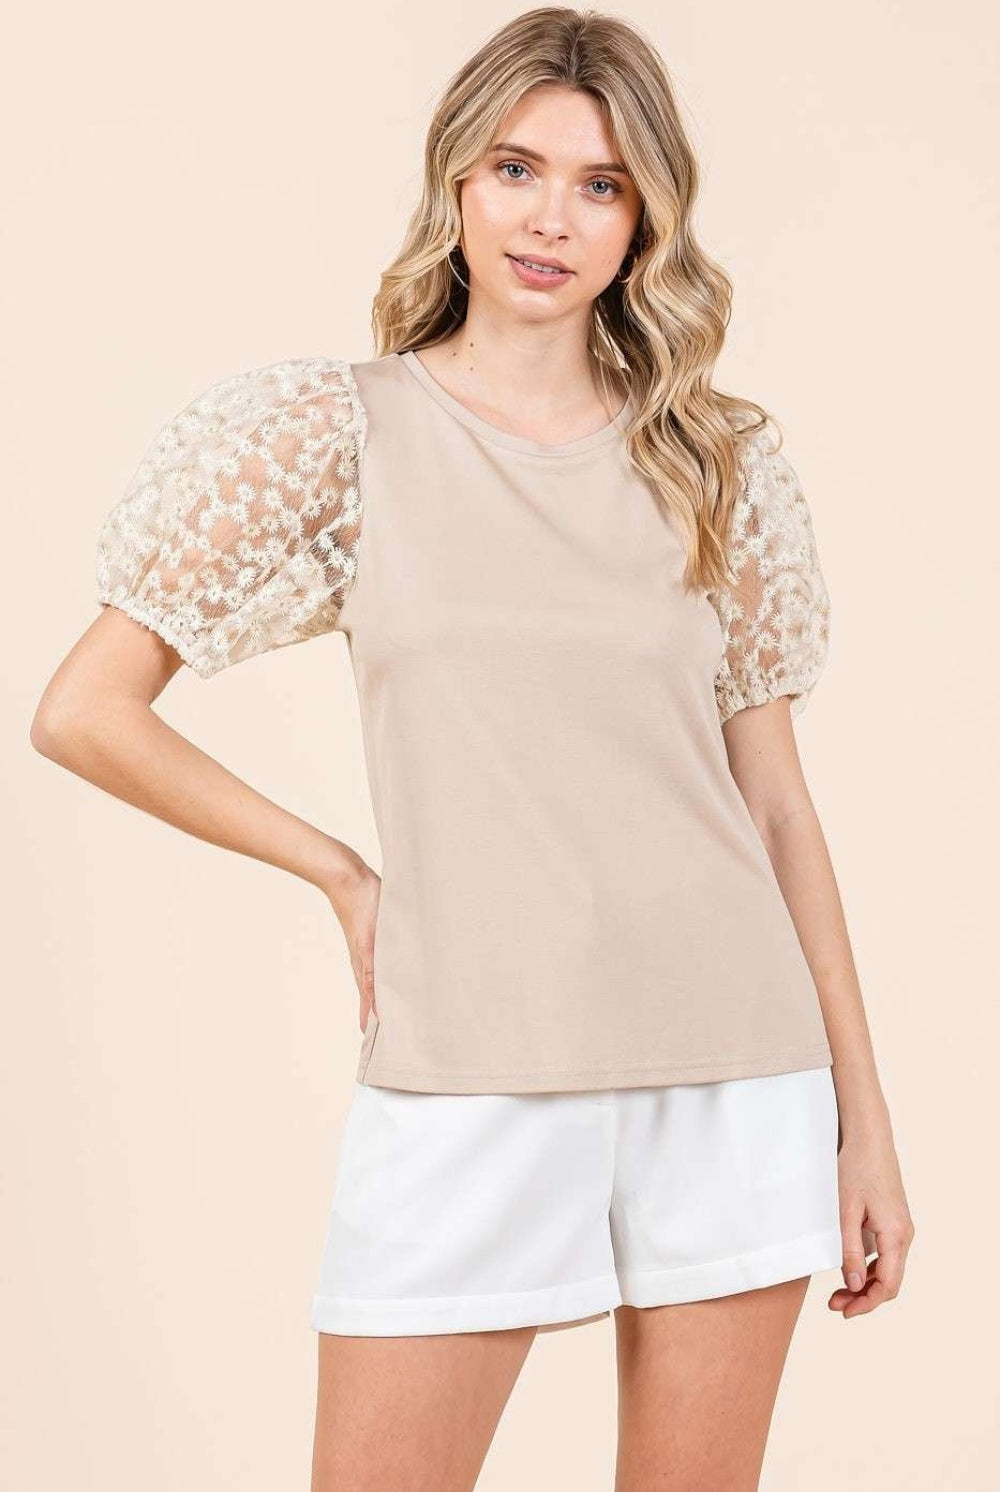 A woman wearing a stylish taupe top with puff sleeves, combining modern elegance with classic comfort, perfect for versatile styling.